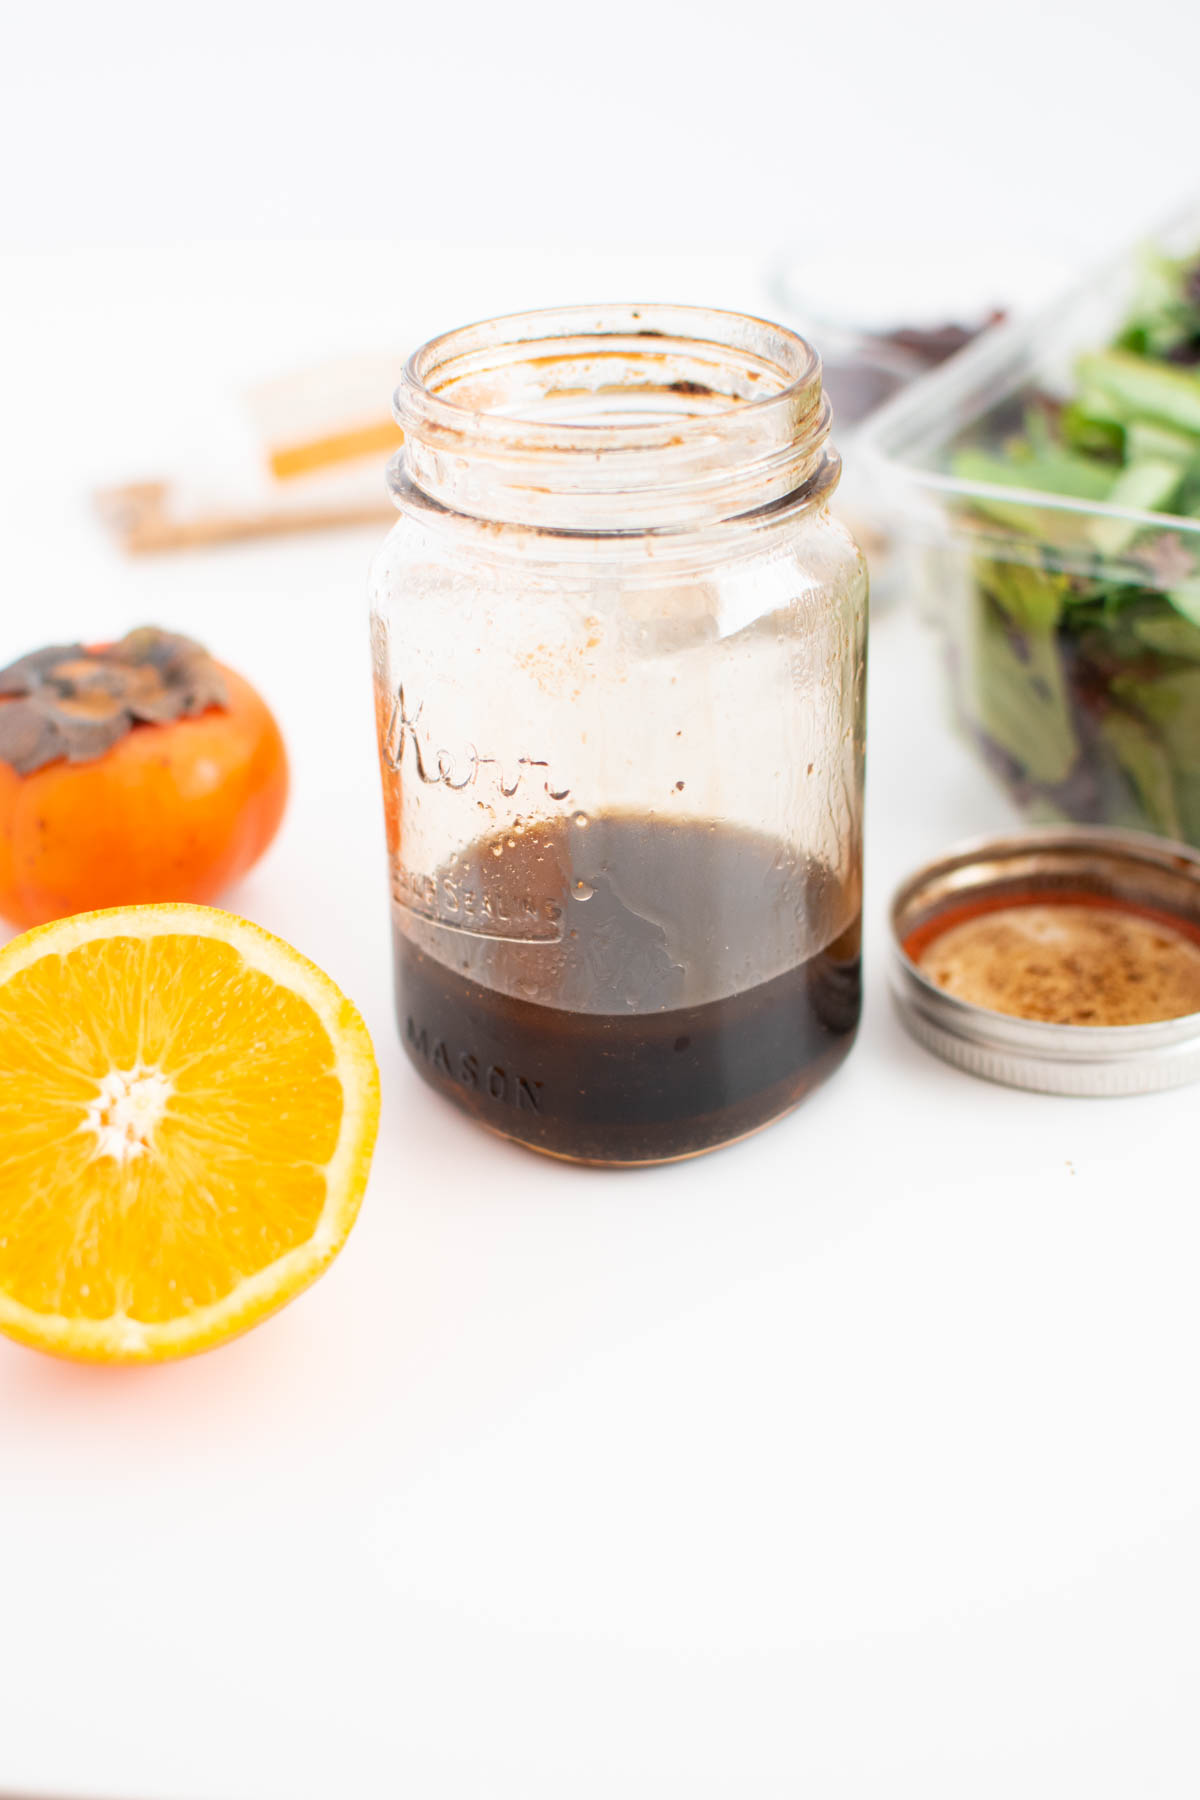 Glass jar with a small amount of balsamic dressing on white table with fresh persimmon and orange nearby.